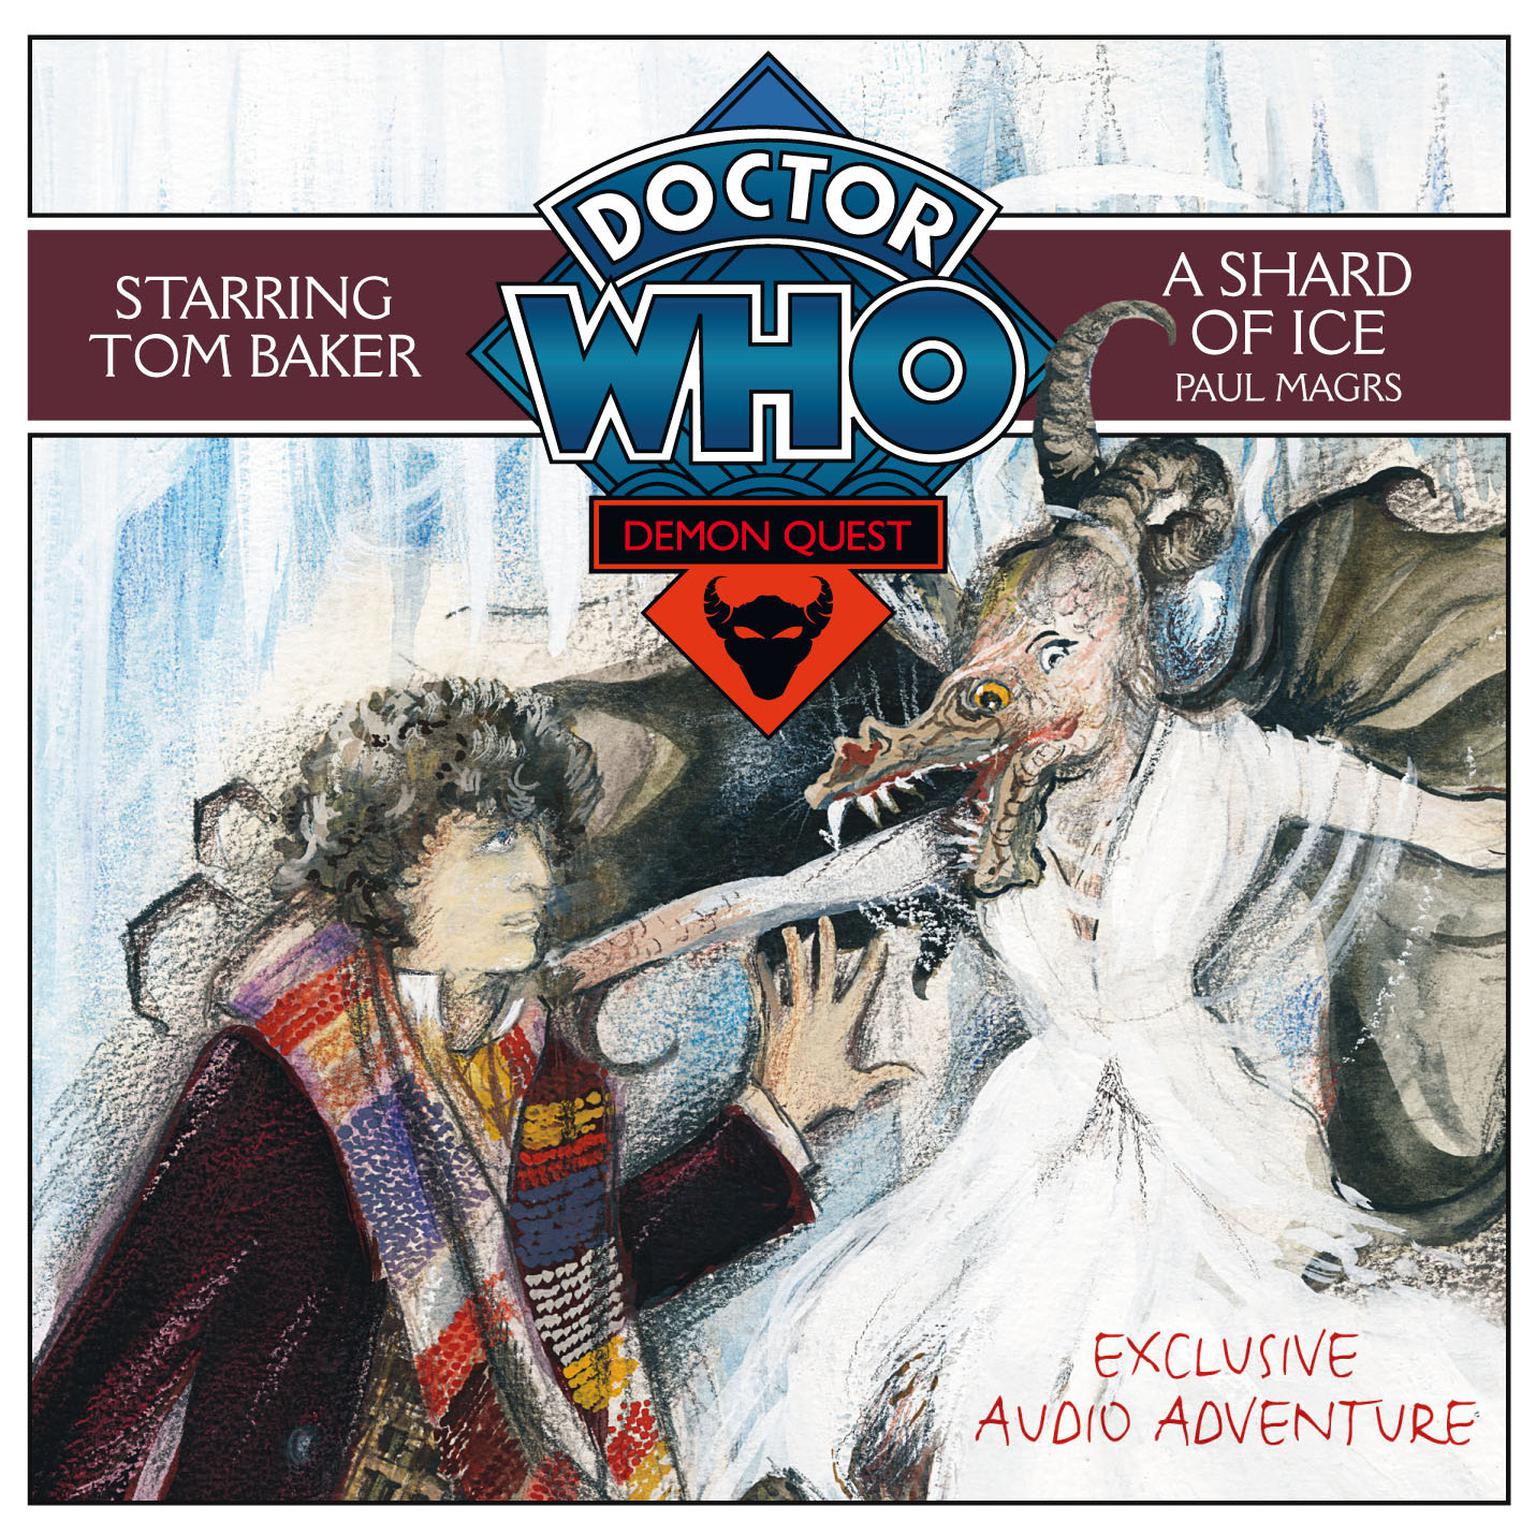 Doctor Who: A Shard of Ice Audiobook, by Paul Magrs